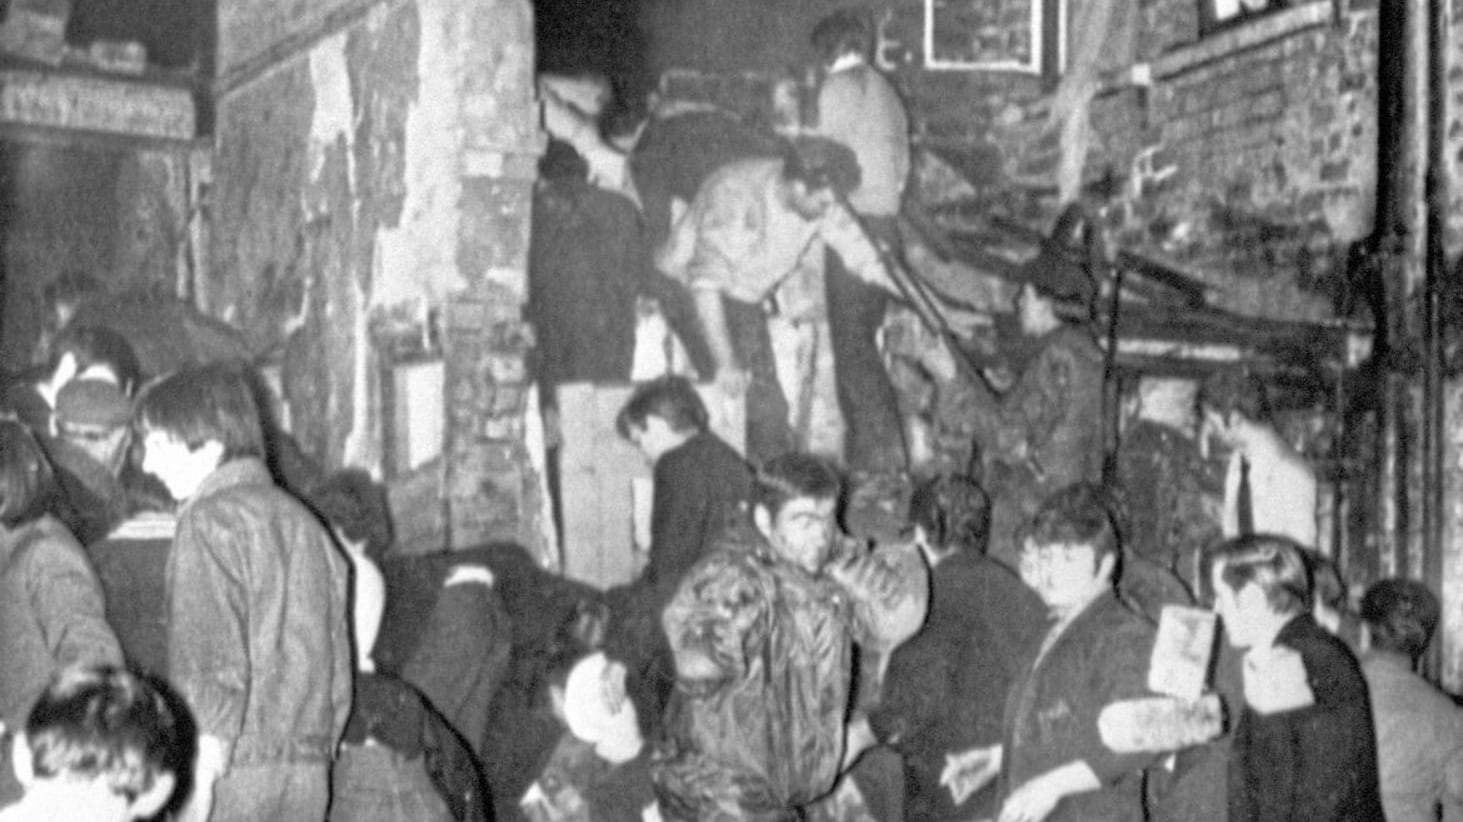 The aftermath of the bomb blast at McGurk's bar